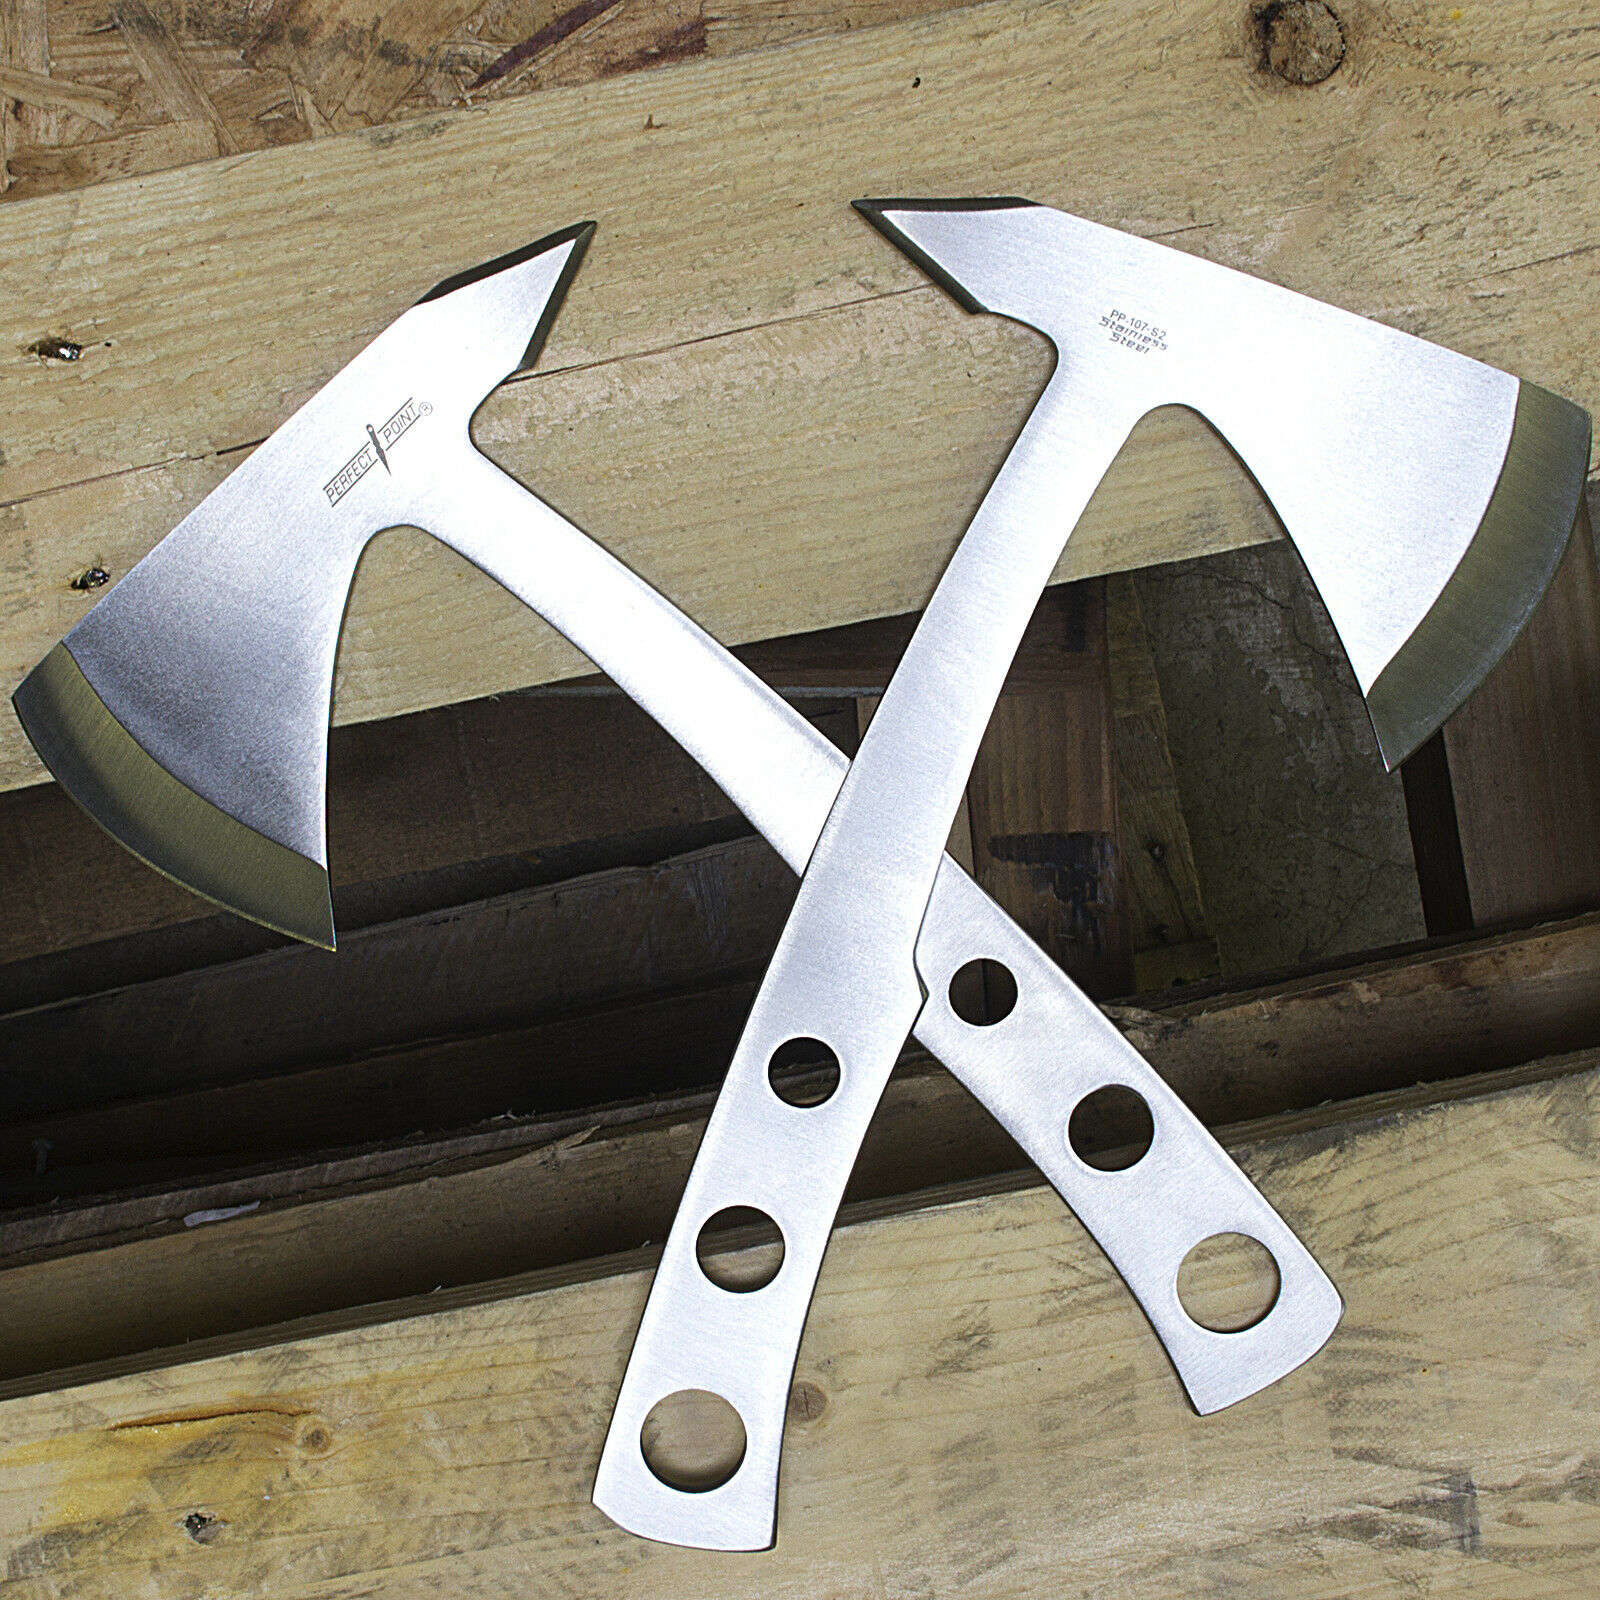 2 Pc Perfect Point 9.5" Stainless Steel Throwing Axe Set Hawk Hatchet Tomahawk